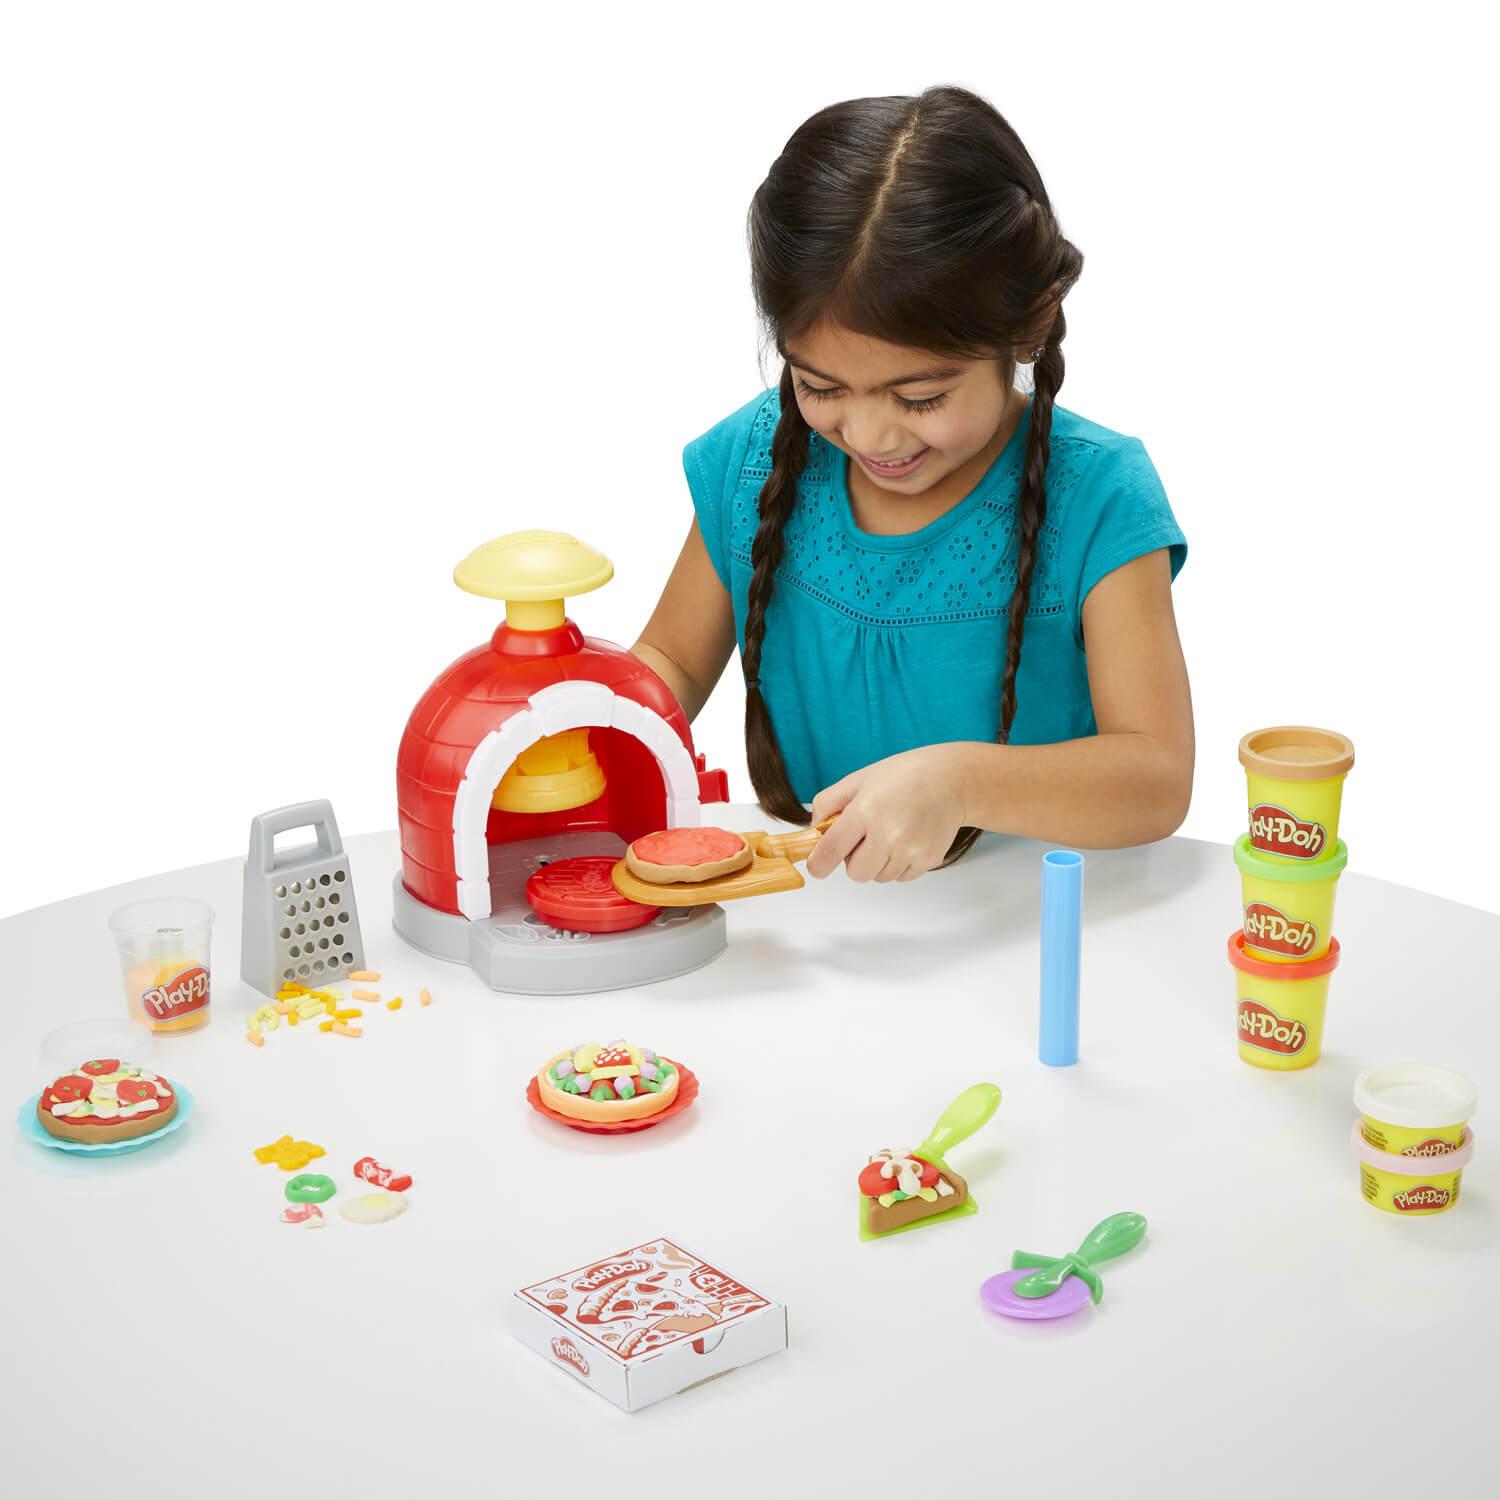 Caisse enregistreuse sonore Play Doh - Play-Doh | Beebs